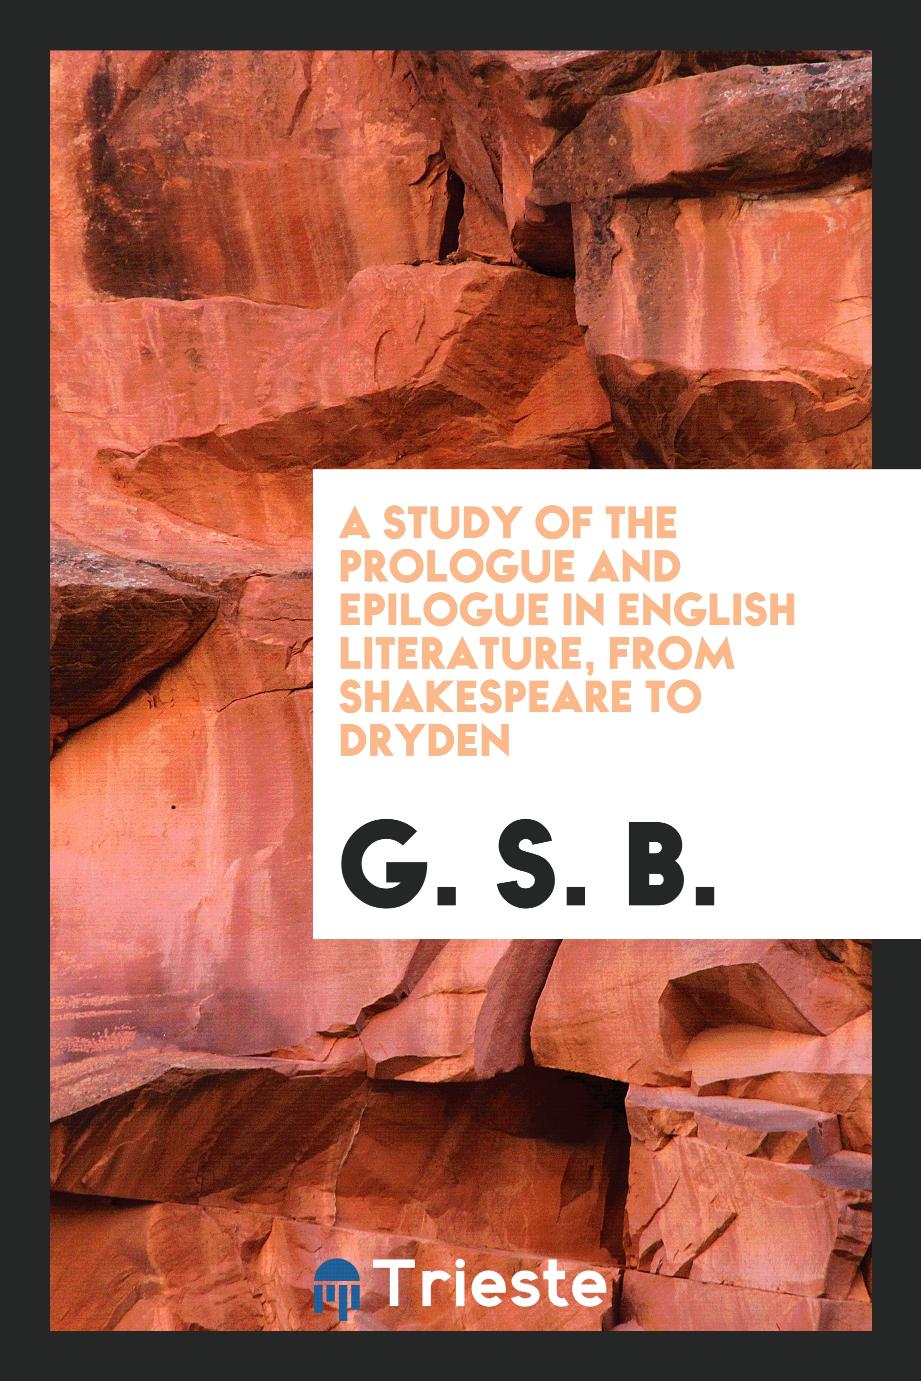 A Study of the Prologue and Epilogue in English Literature, from Shakespeare to Dryden